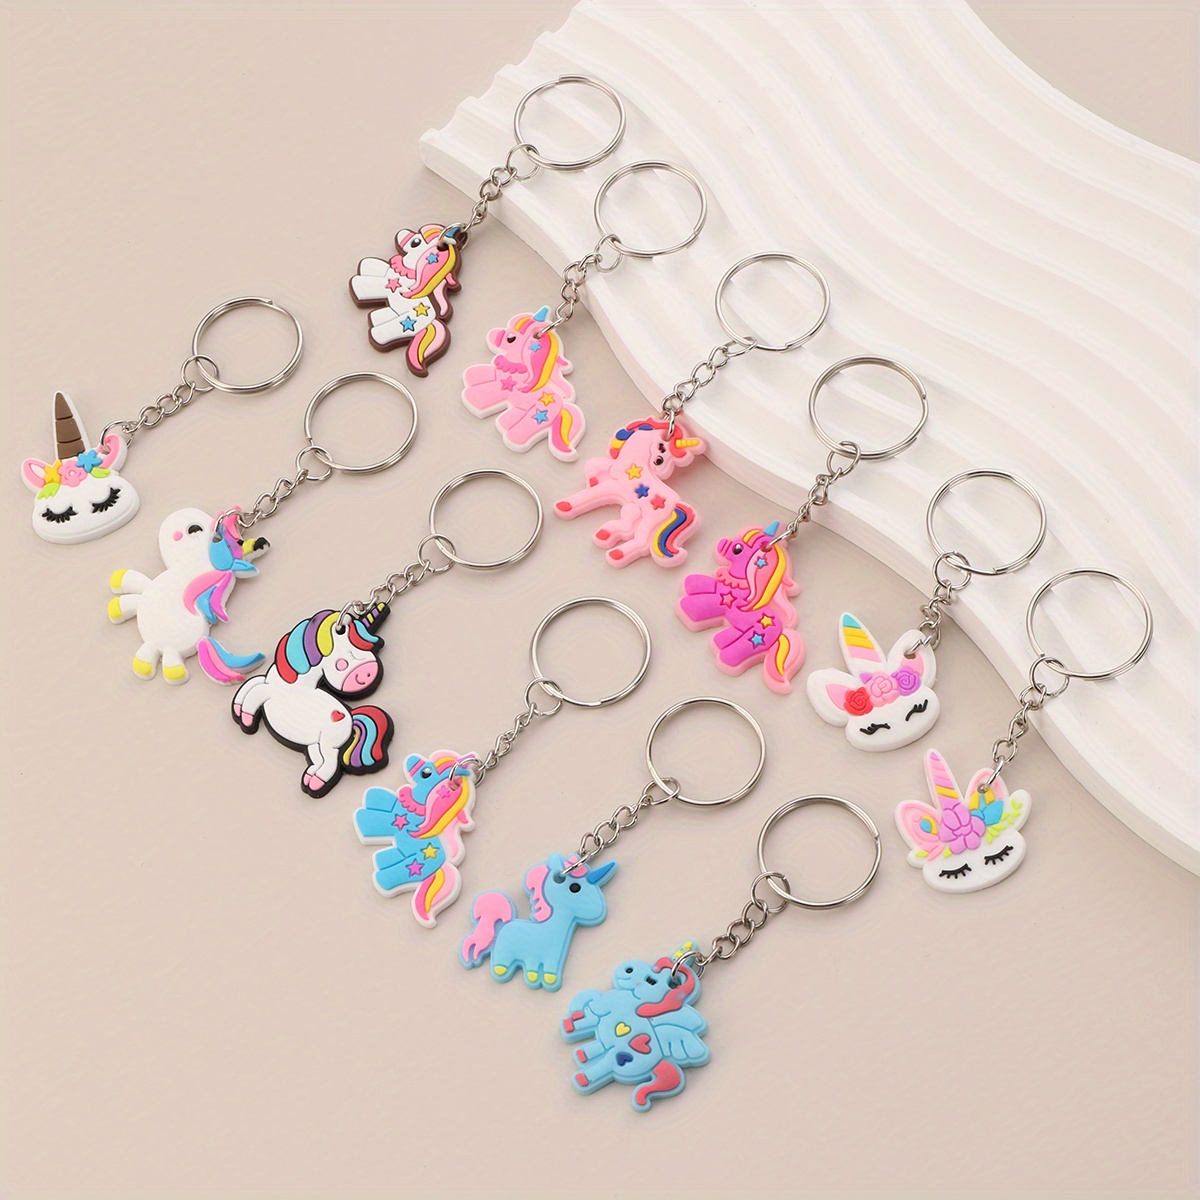 Claire's-Keyholder